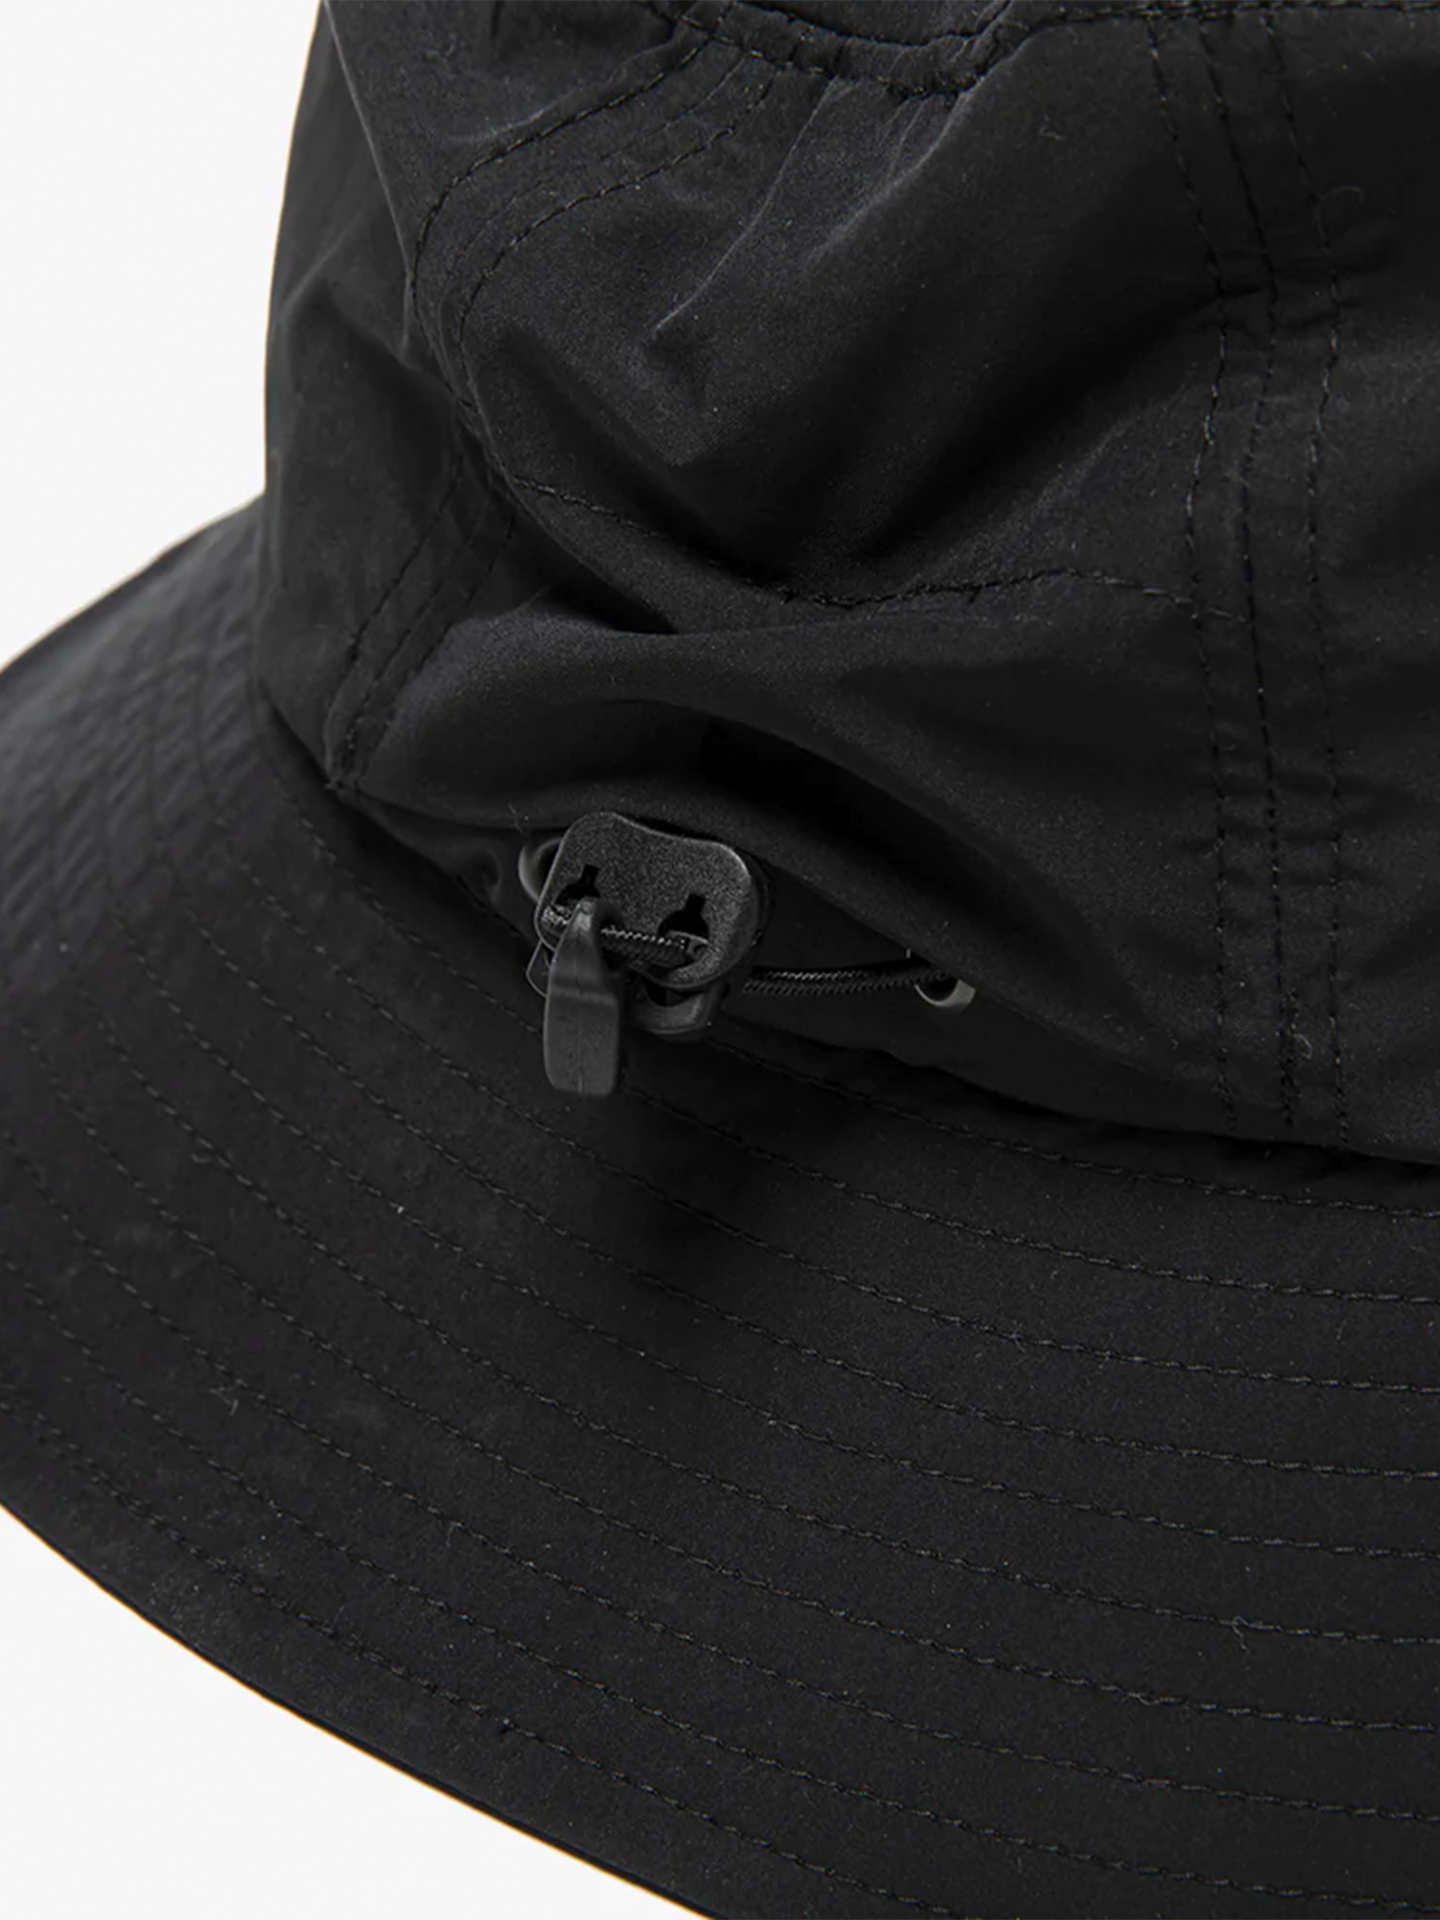 Панама Meanswhile Adjustable Hat LBL